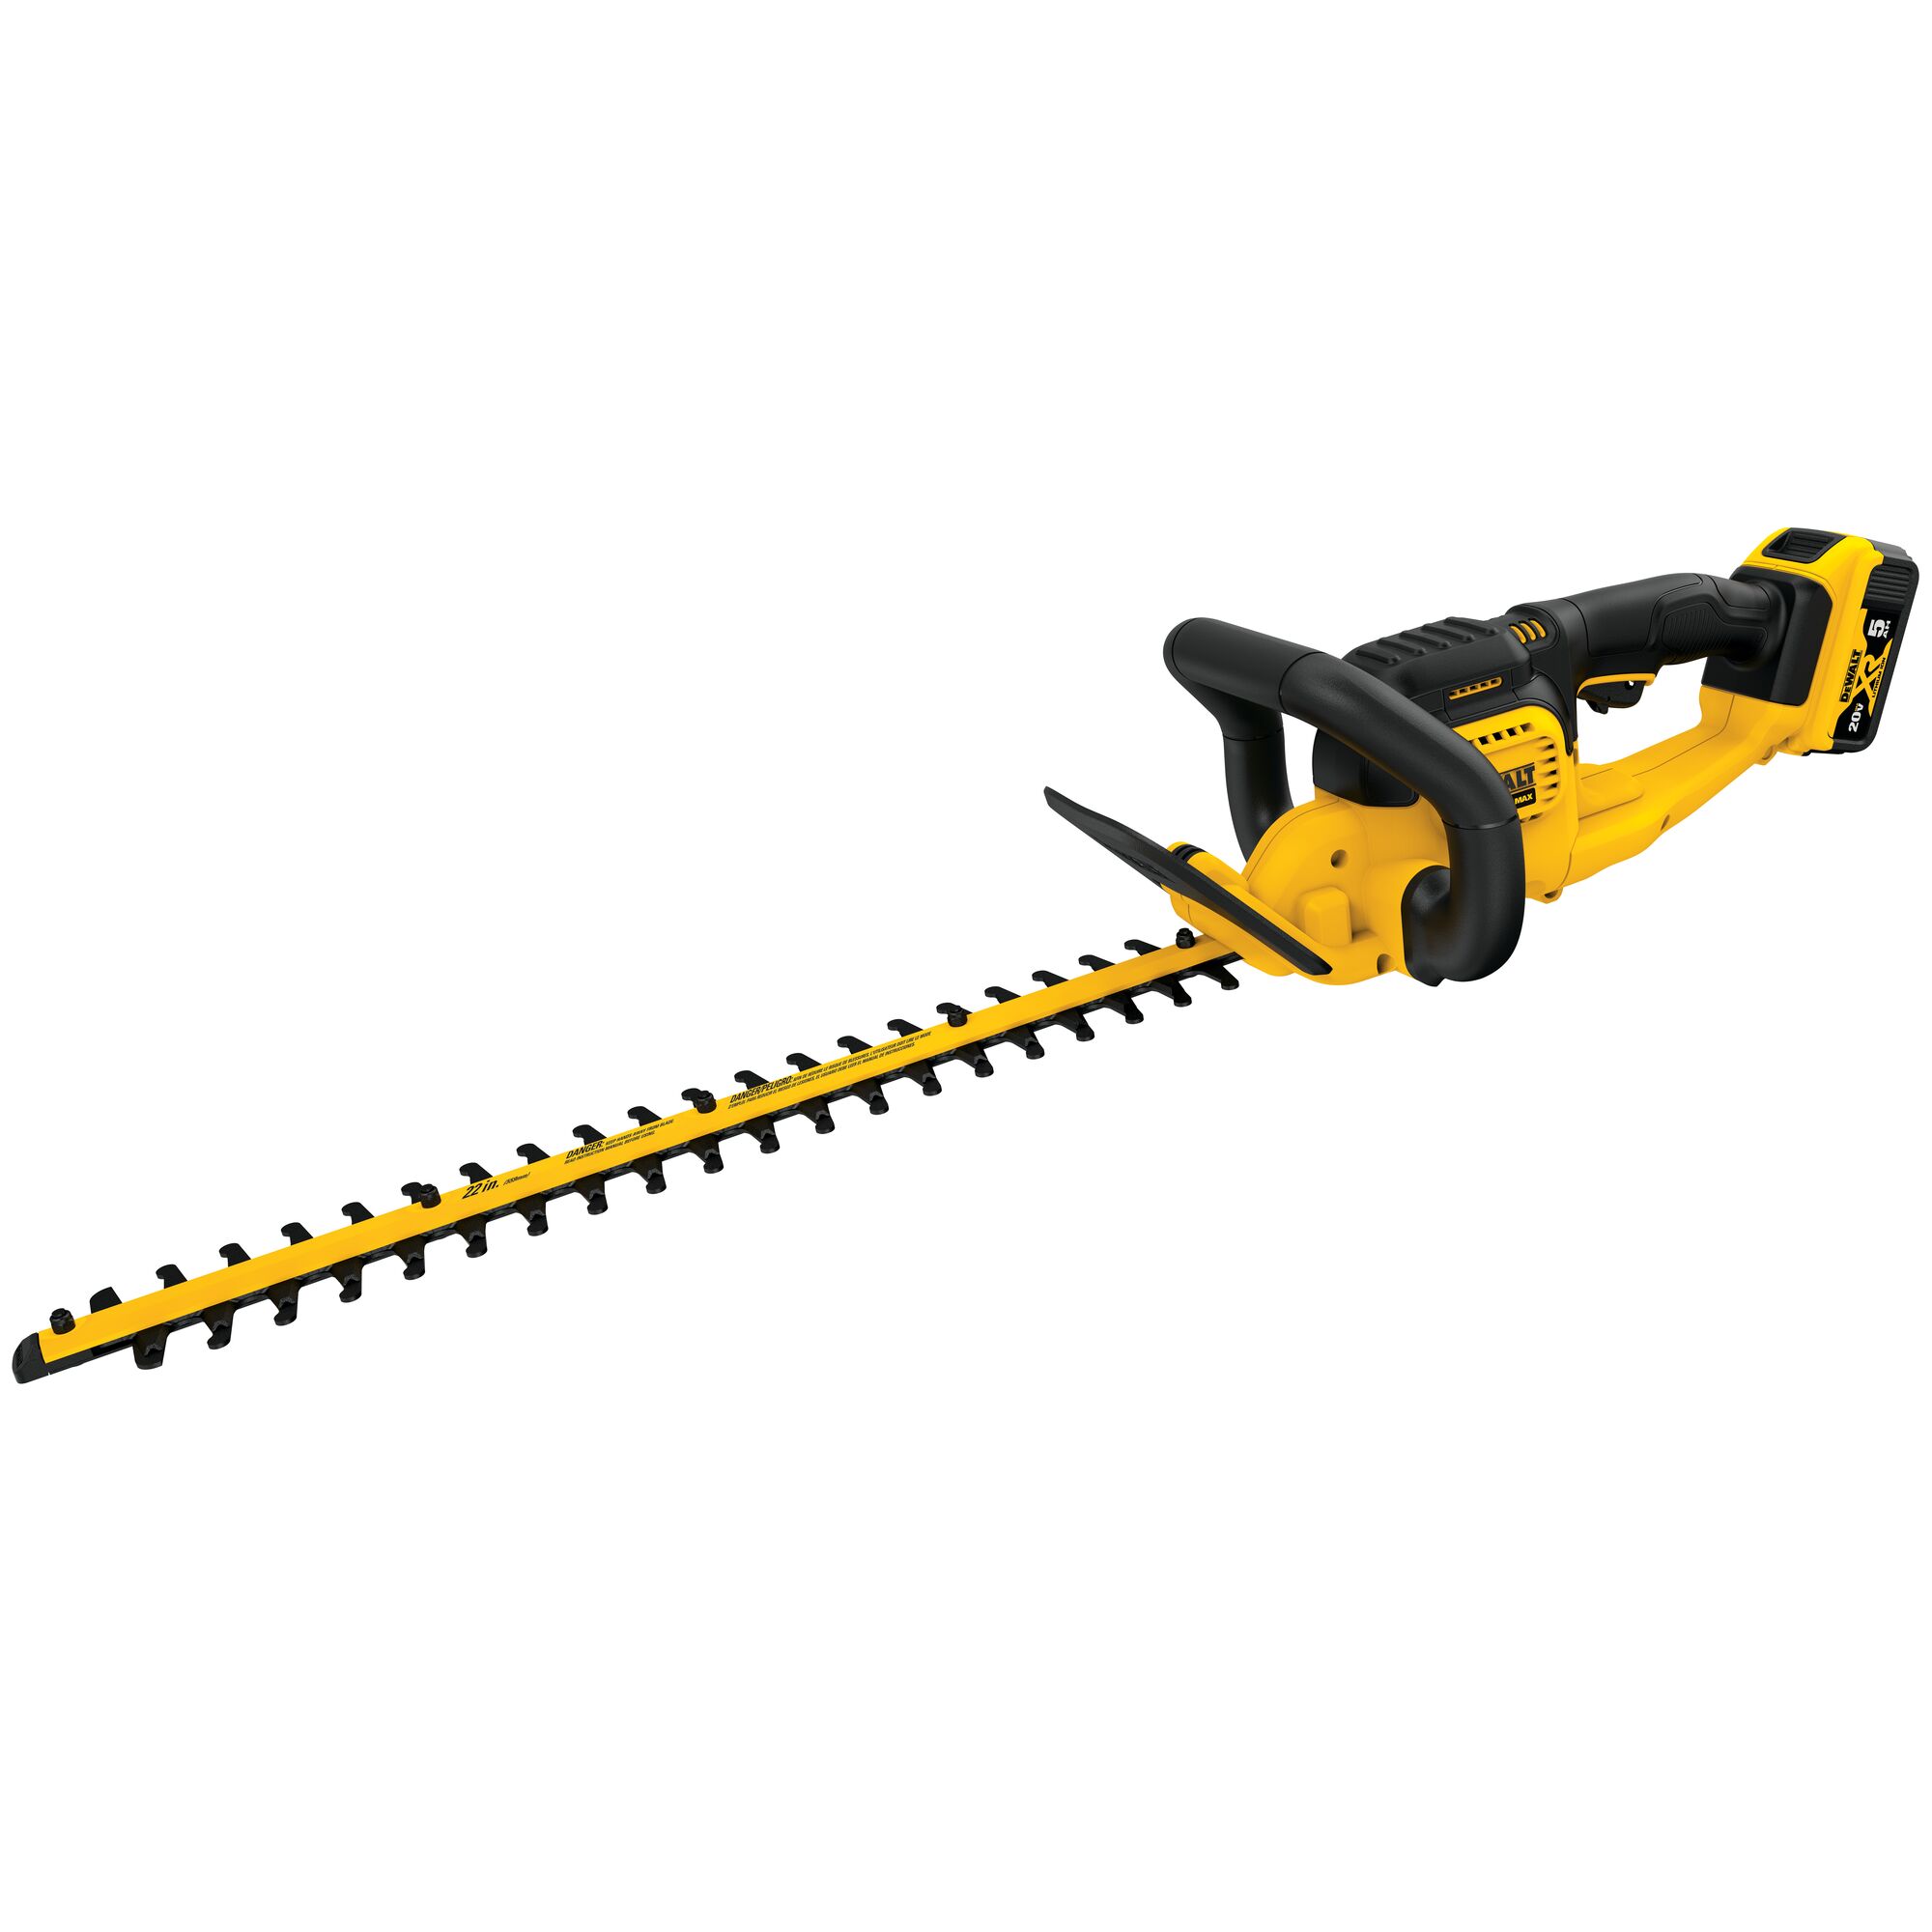 How to Safely Use Your Hand Held Hedge Trimmer